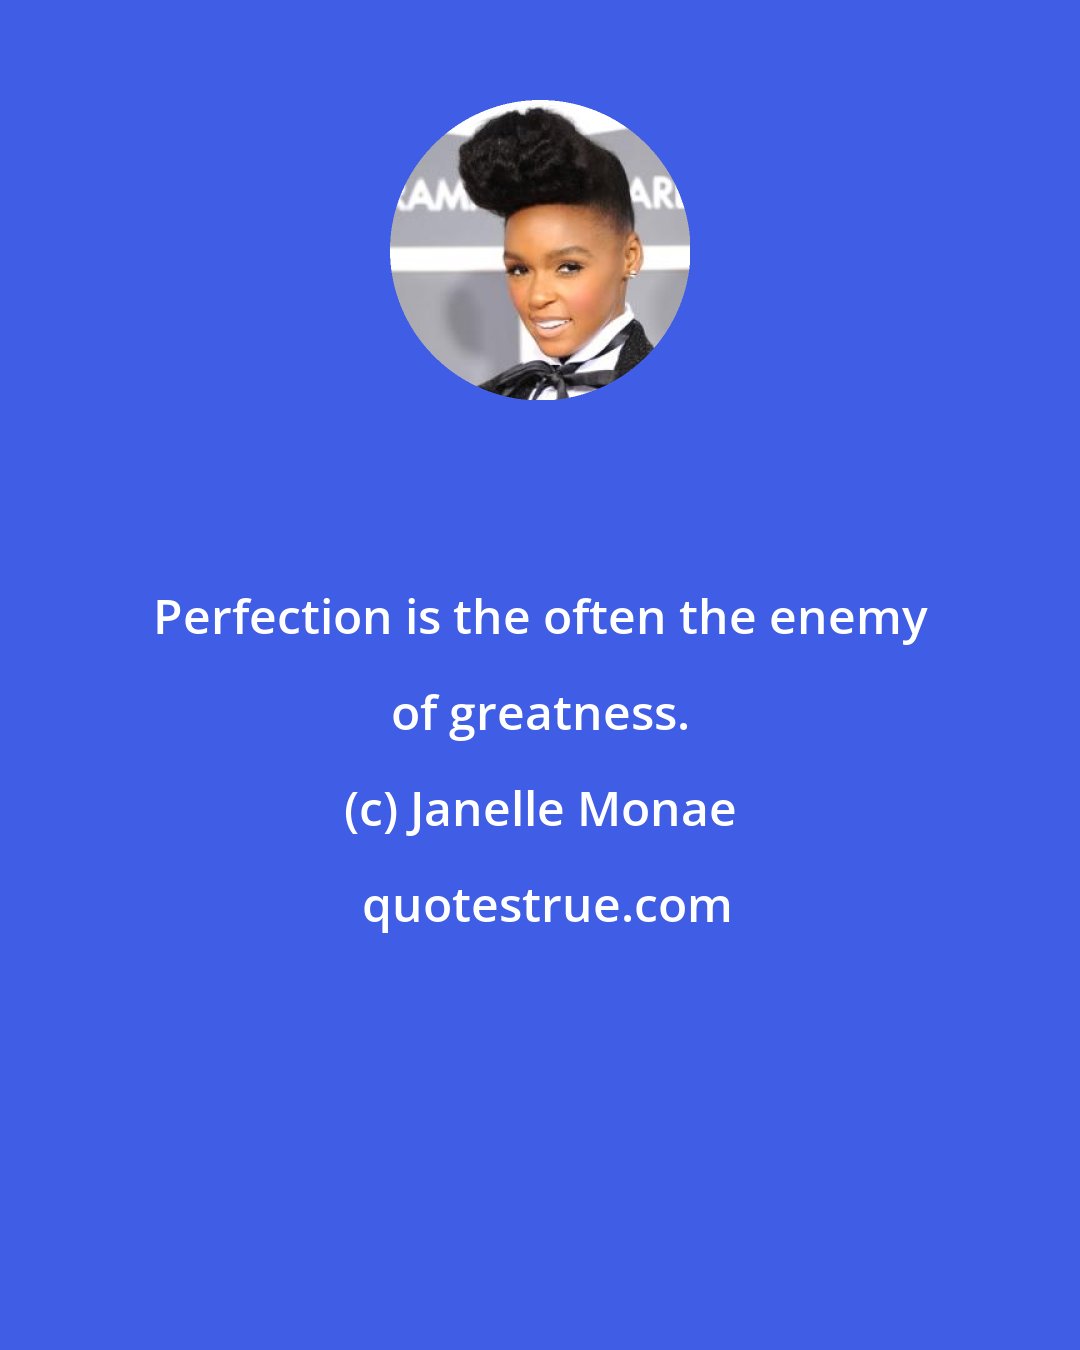 Janelle Monae: Perfection is the often the enemy of greatness.